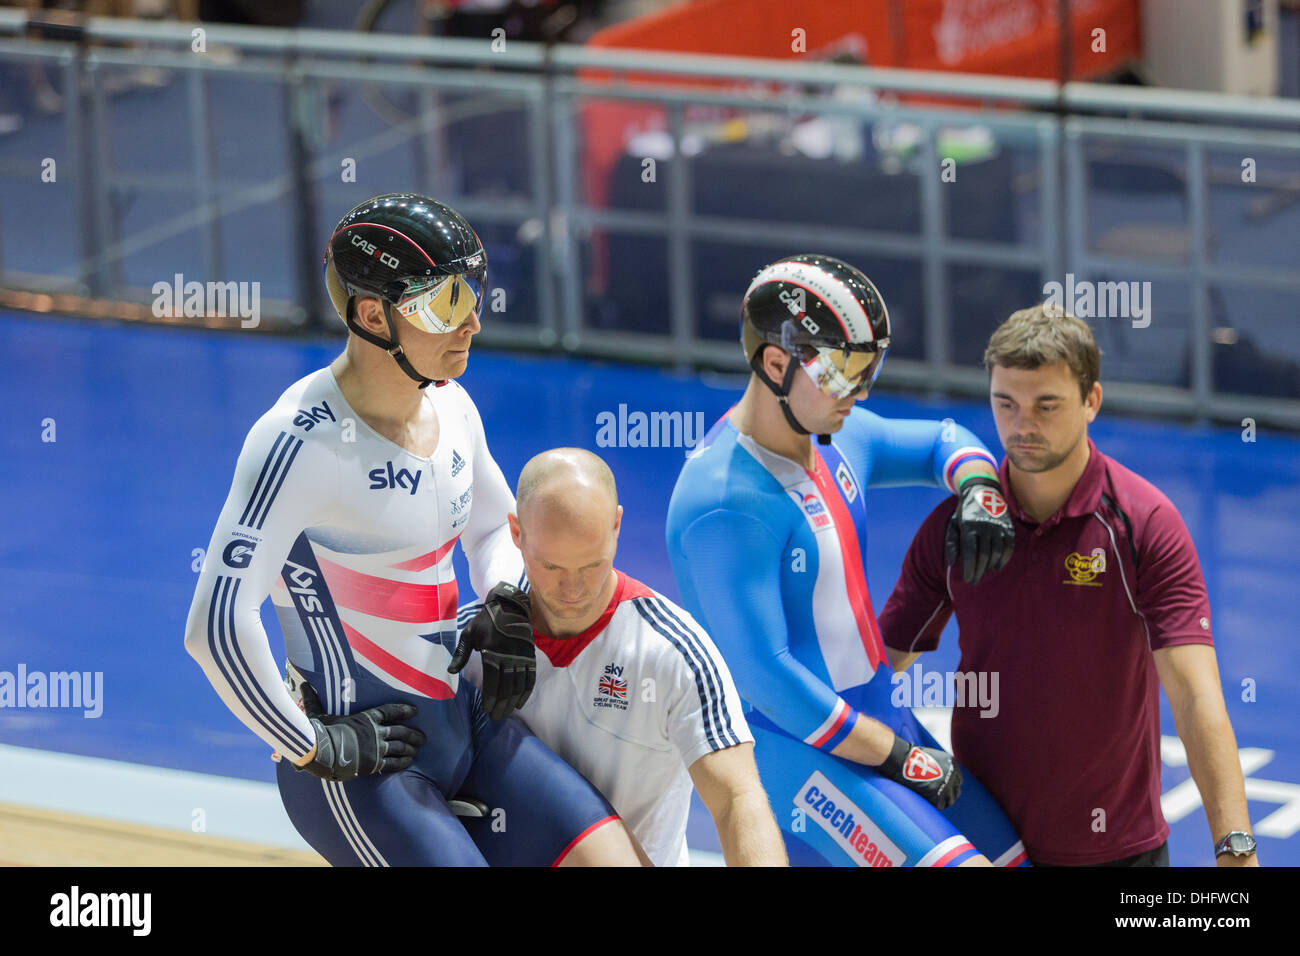 Matthew Crampton (GBR) and coach at start of the Mens Sprint Quarter final line up against  Adam Ptacnik (CZE) and coach. Stock Photo